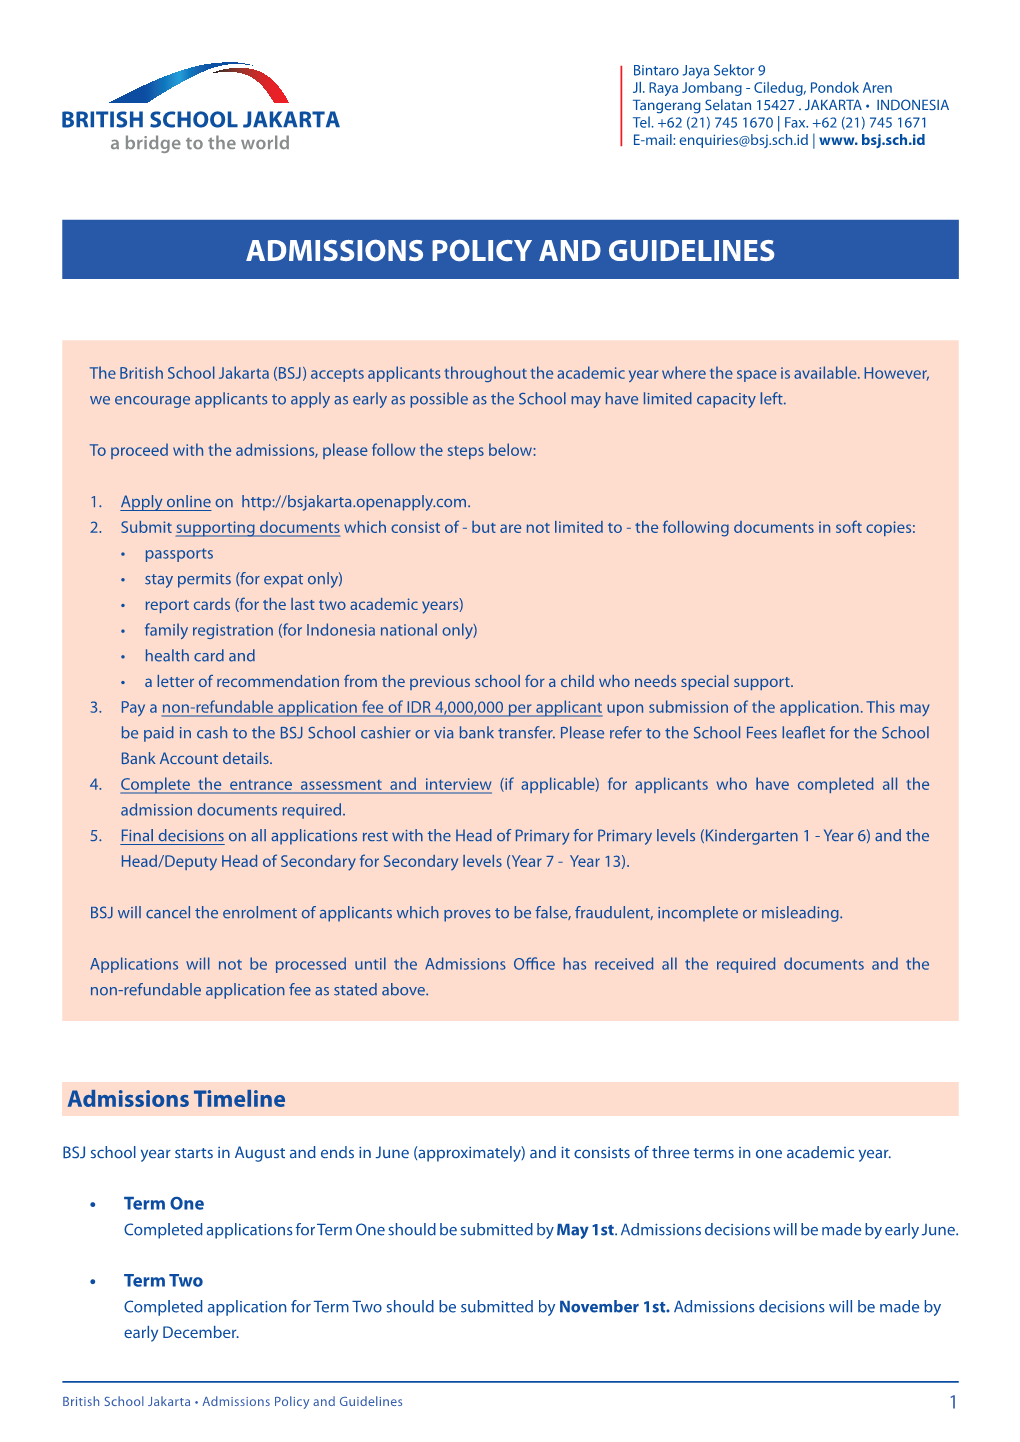 Admissions Policy and Guidelines